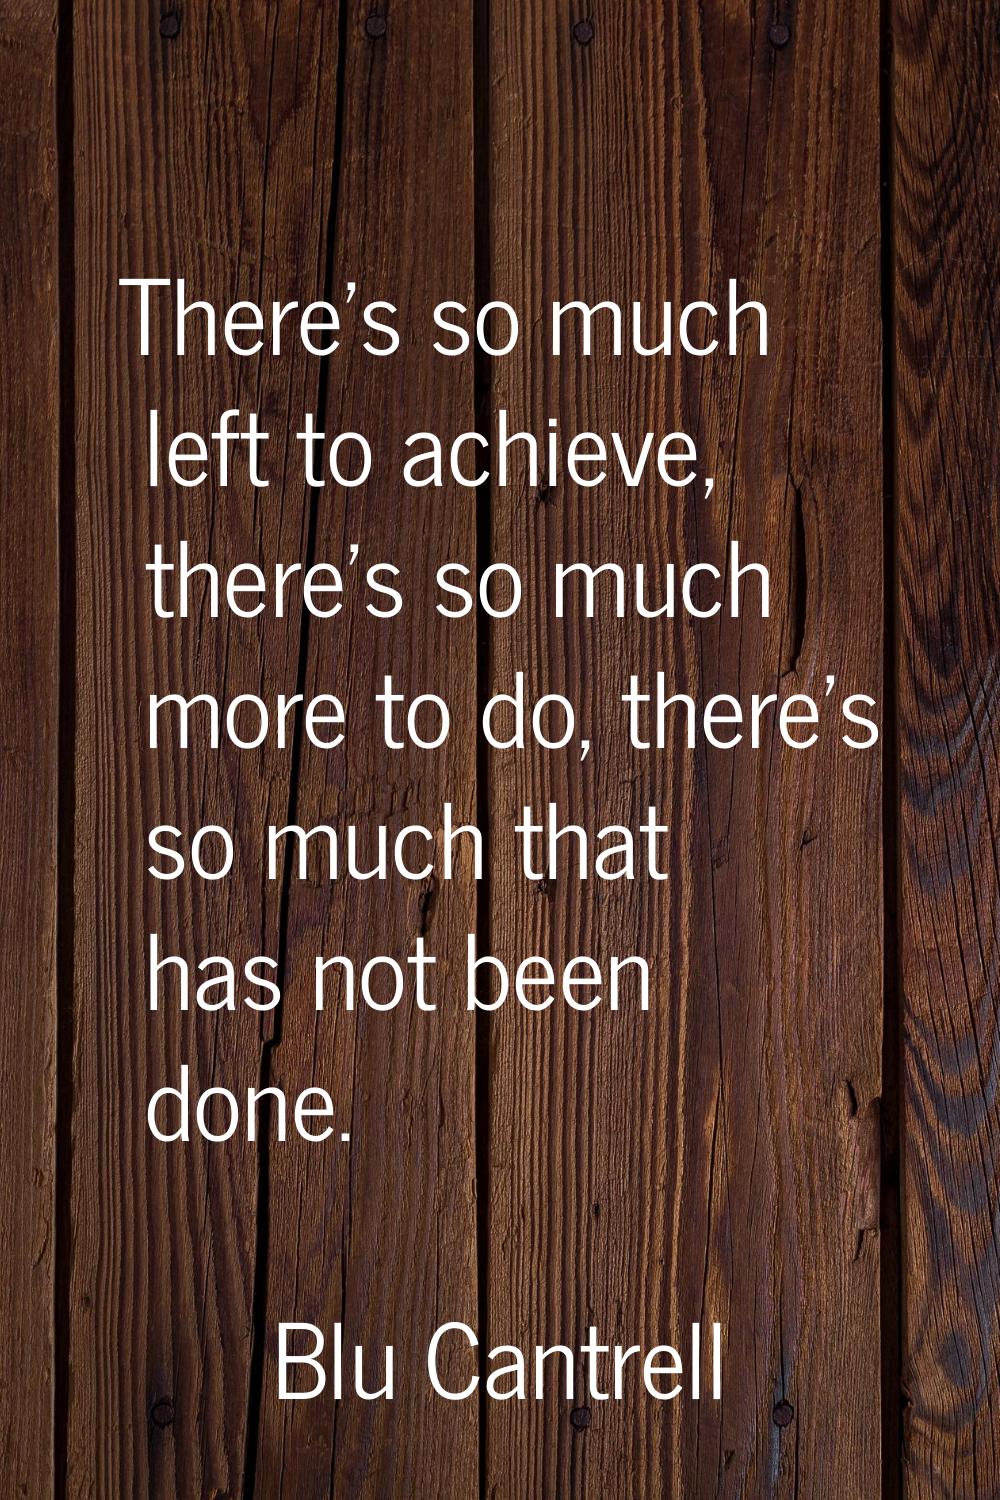 There's so much left to achieve, there's so much more to do, there's so much that has not been done